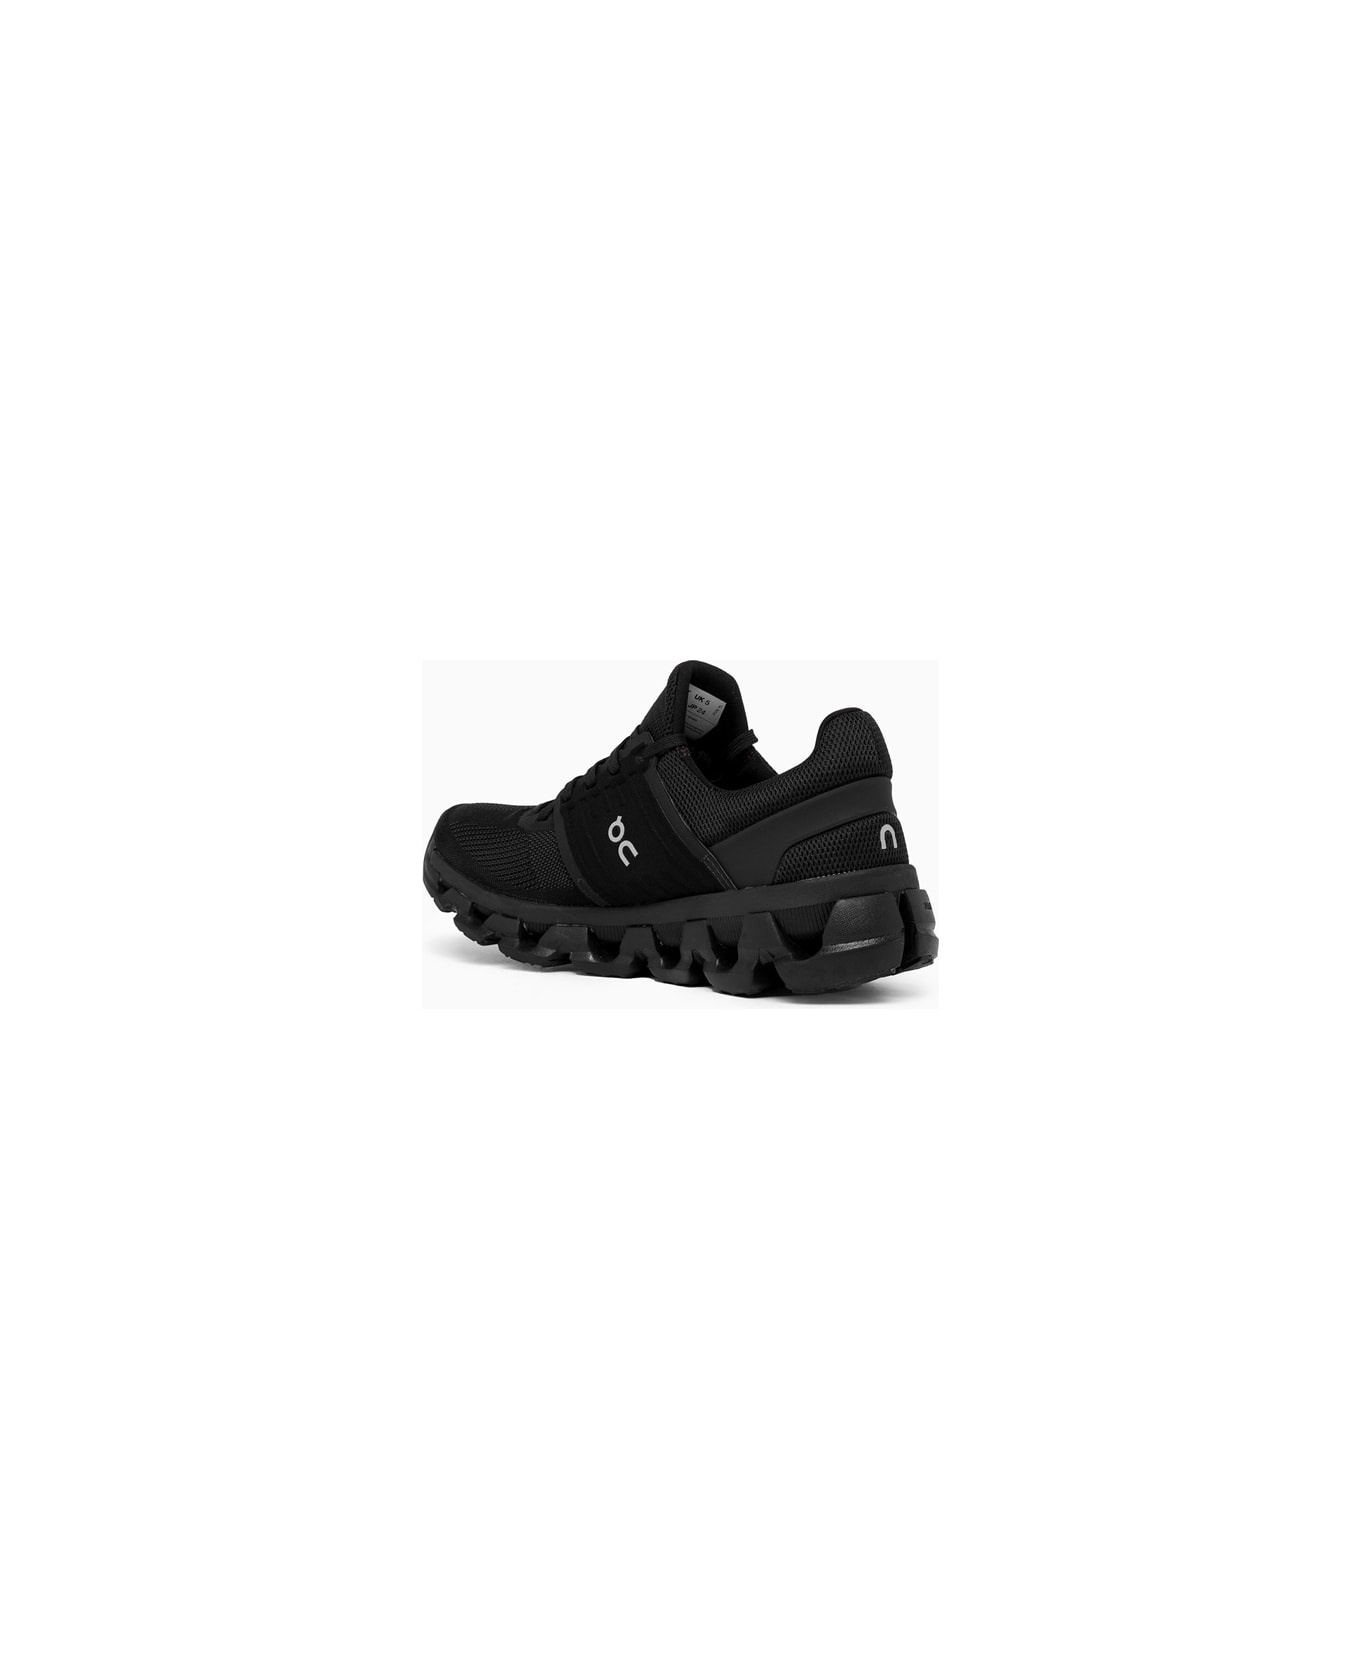 ON Cloudswift 3 Ad Sneakers 3wd10150485 - Nero